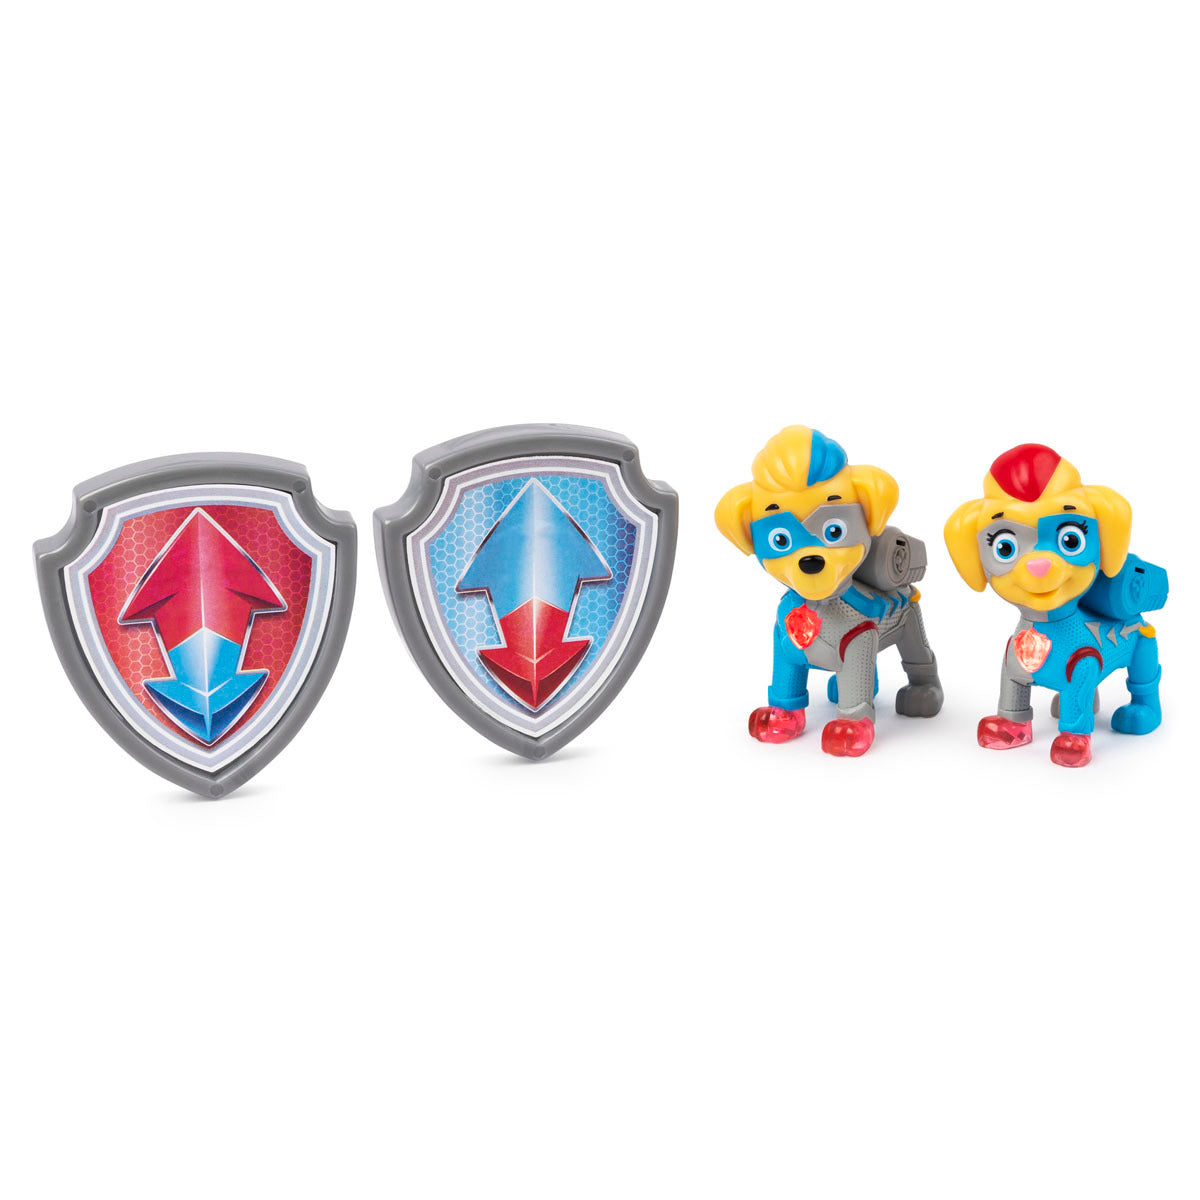 Paw Patrol Mighty Pups Super Paws Light-Up Mighty Twins Figures